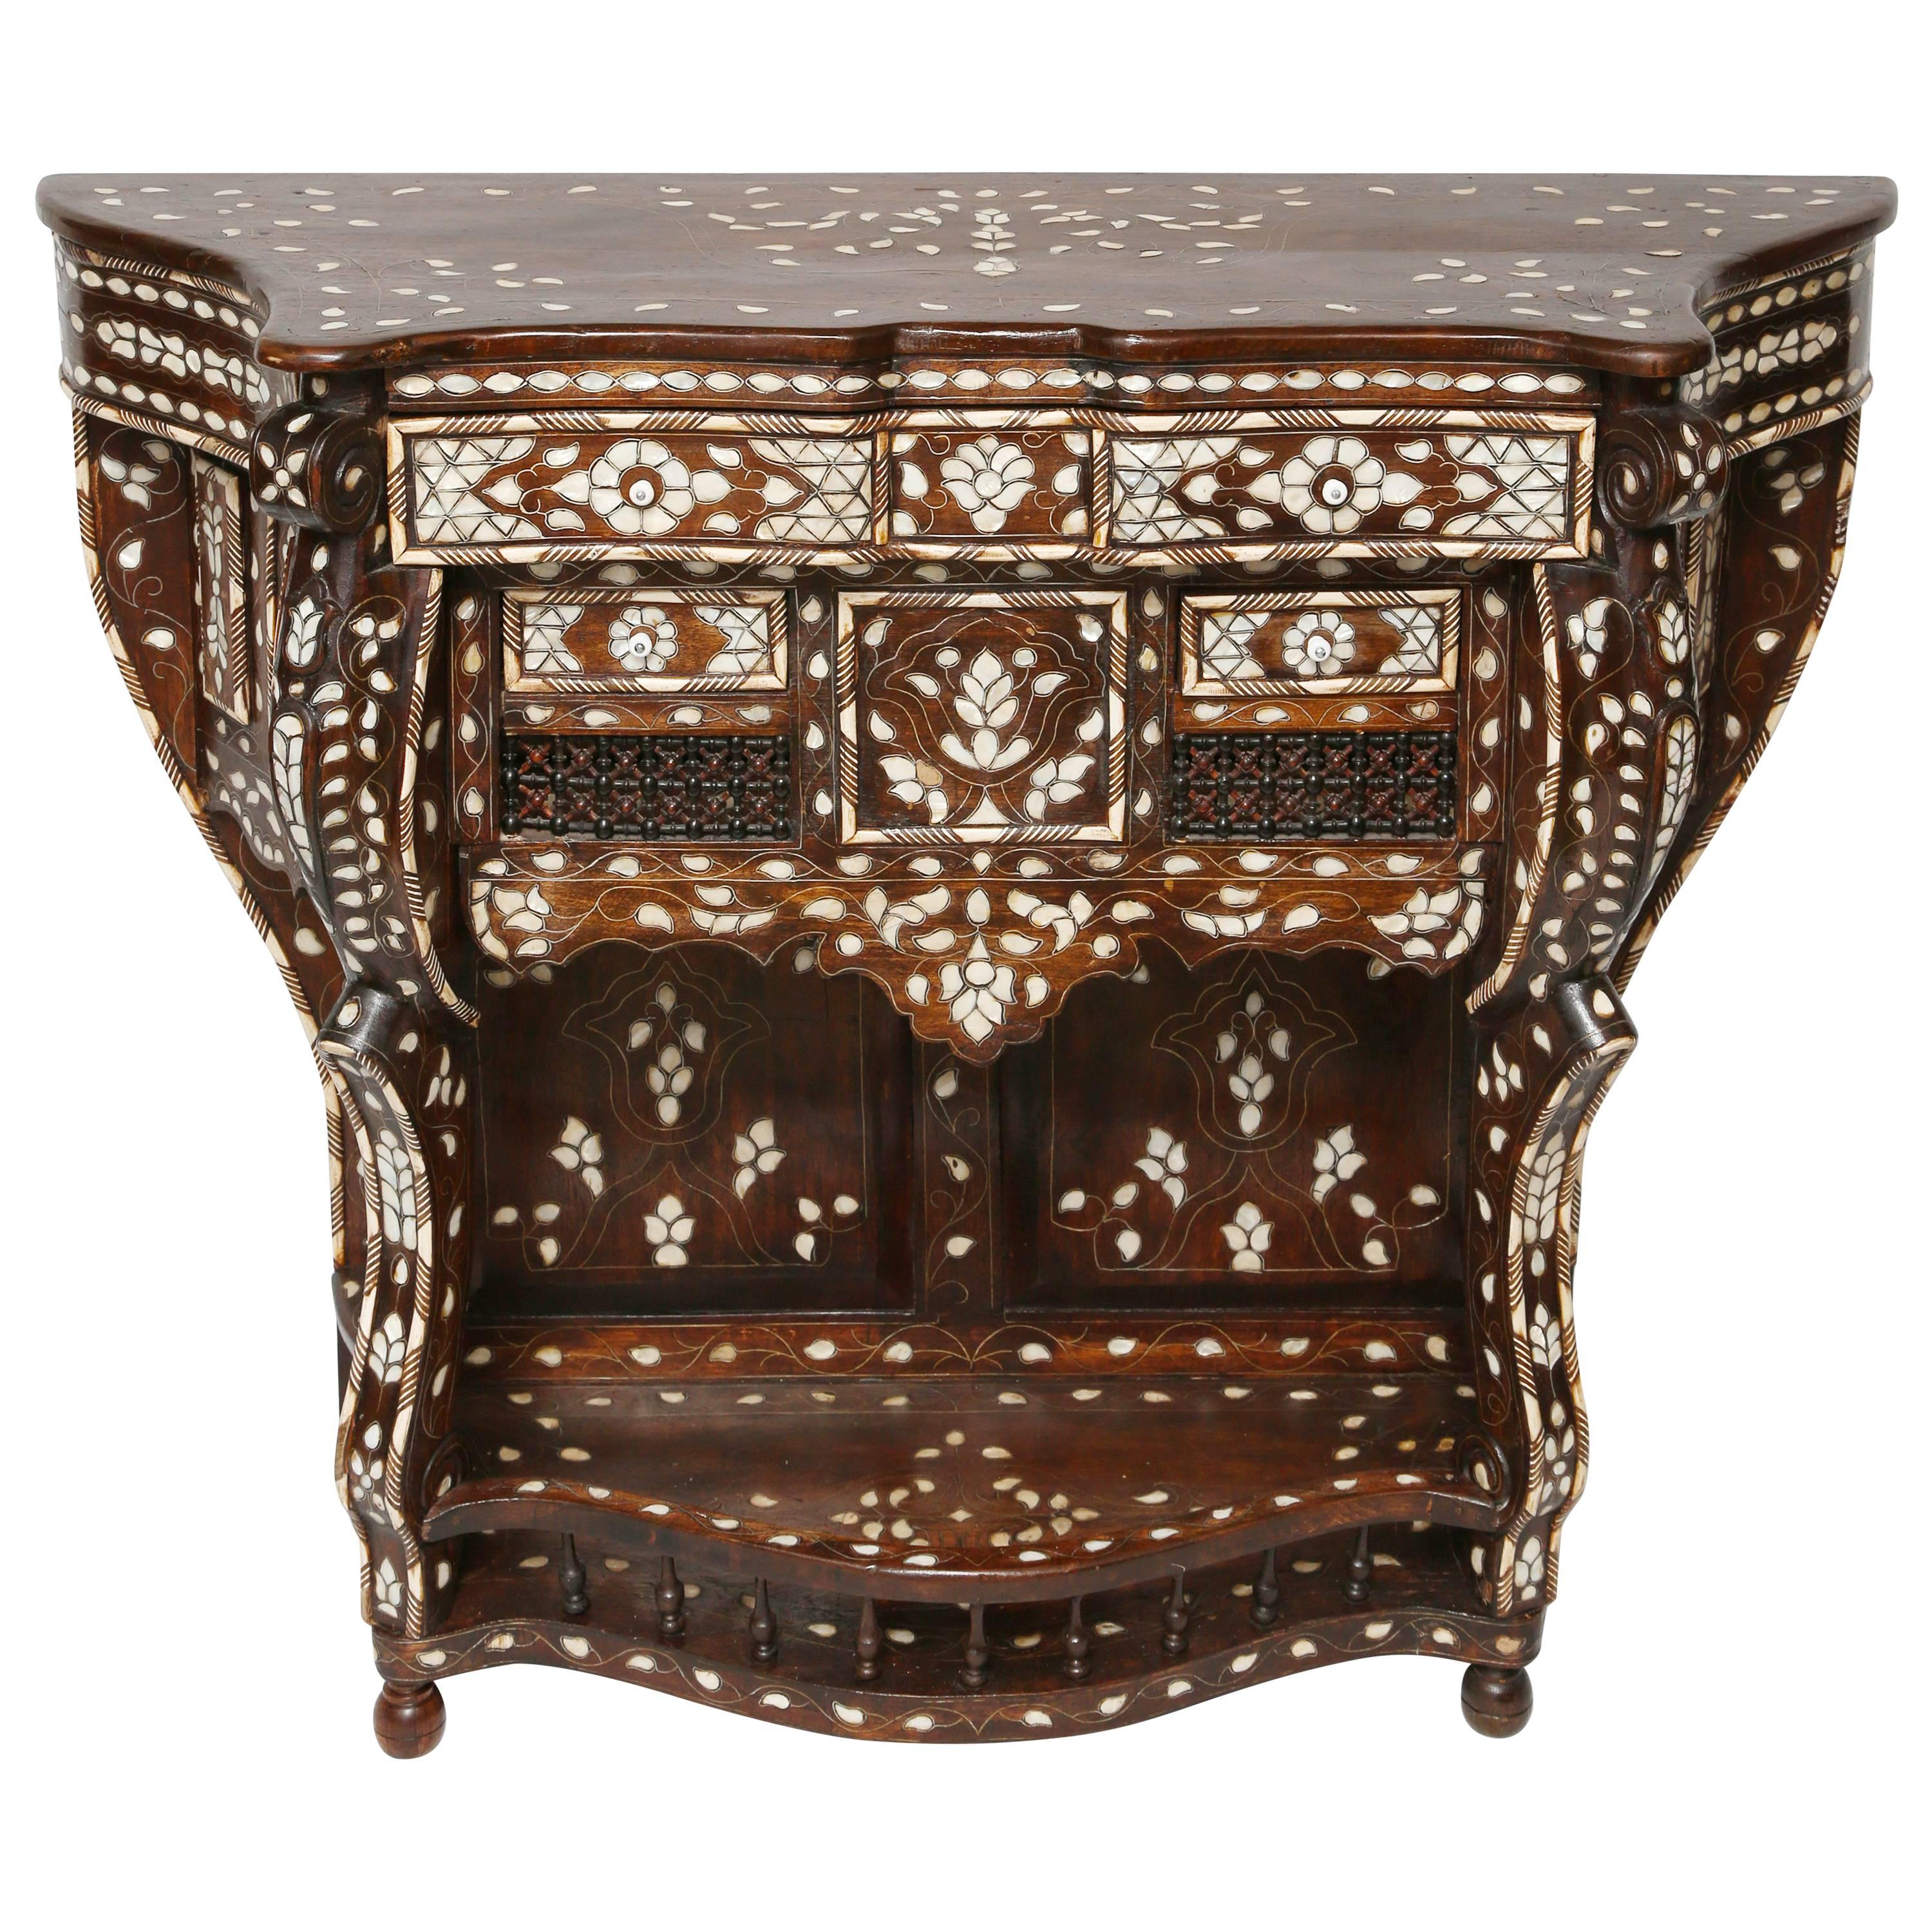 Syrian Mother-of-Pearl Inlaid Console